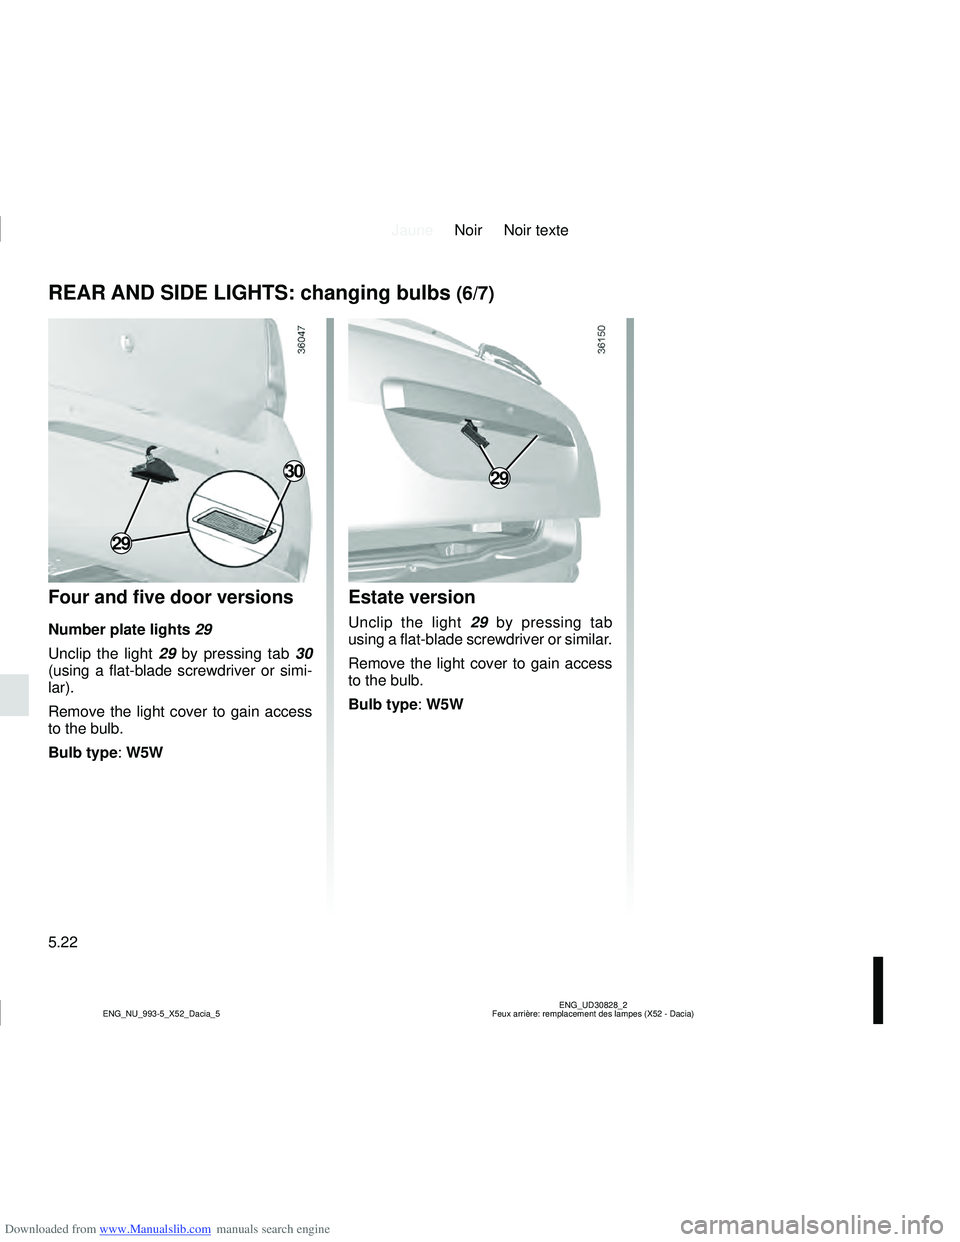 DACIA SANDERO 2022 User Guide Downloaded from www.Manualslib.com manuals search engine JauneNoir Noir texte
5.22
ENG_UD30828_2
Feux arrière: remplacement des lampes (X52 - Dacia)
ENG_NU_993-5_X52_Dacia_5
REAR AND SIDE LIGHTS: cha